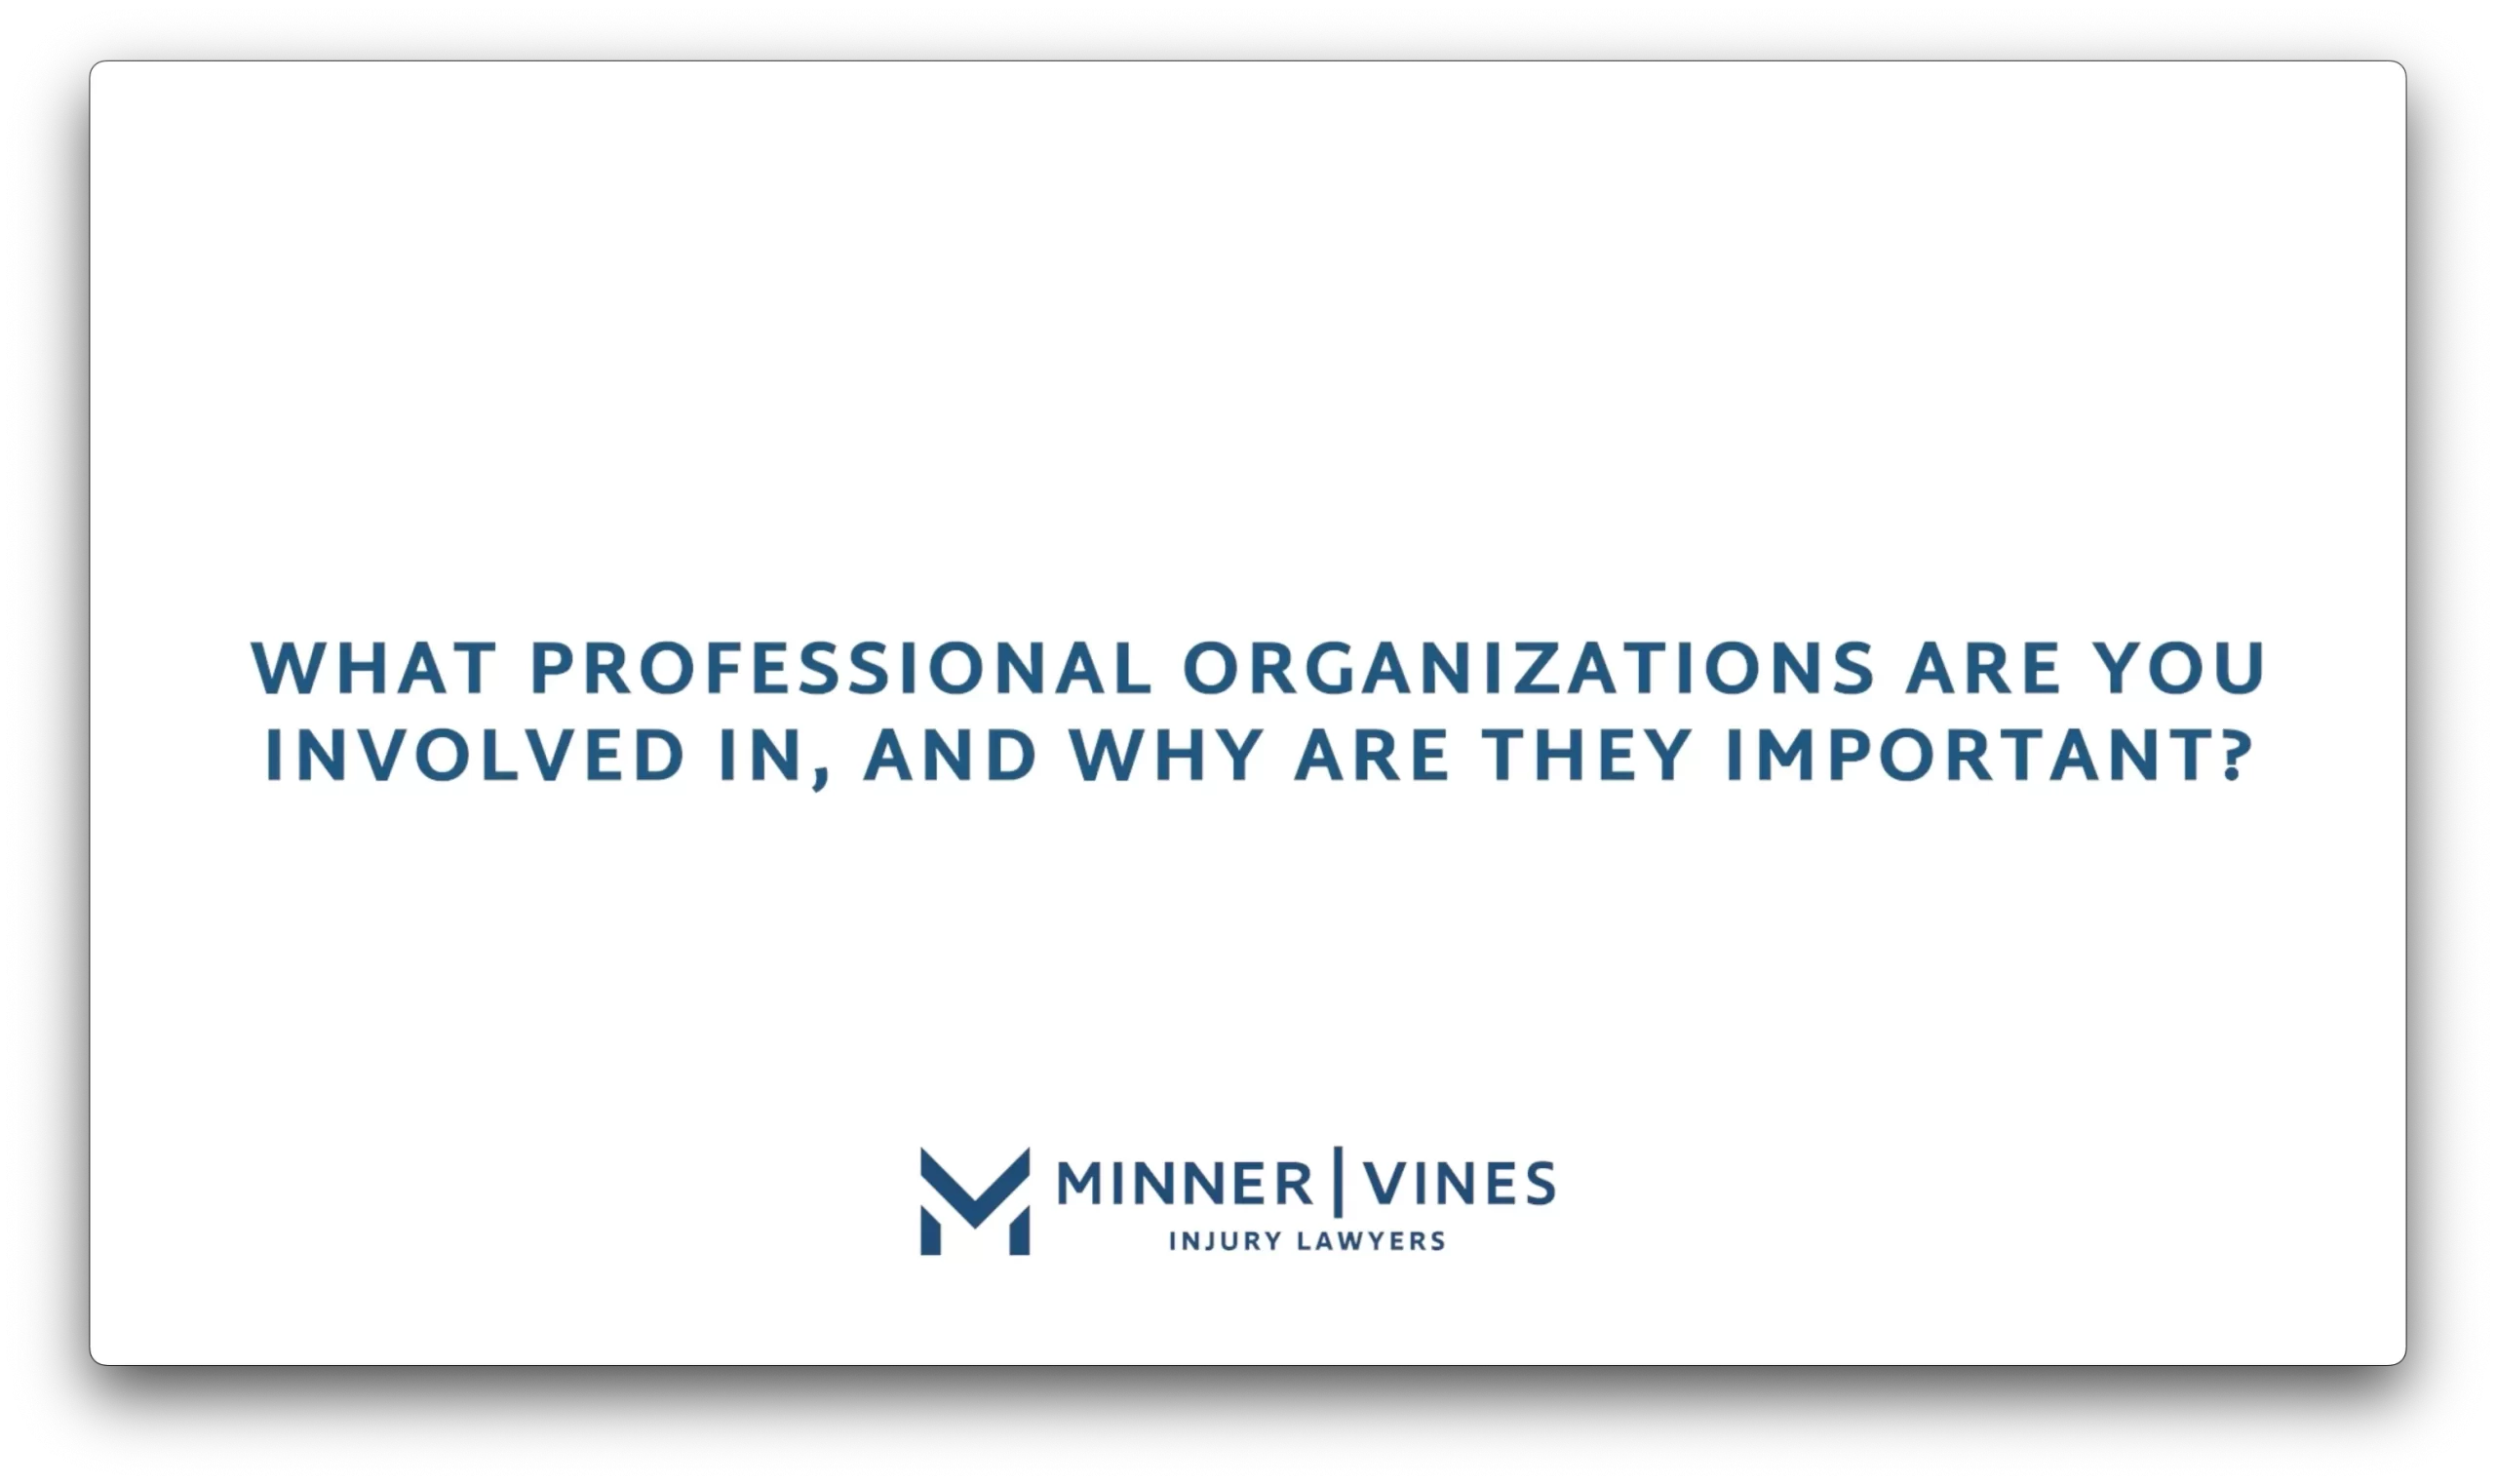 What professional organizations are you involved in, and why are they important?